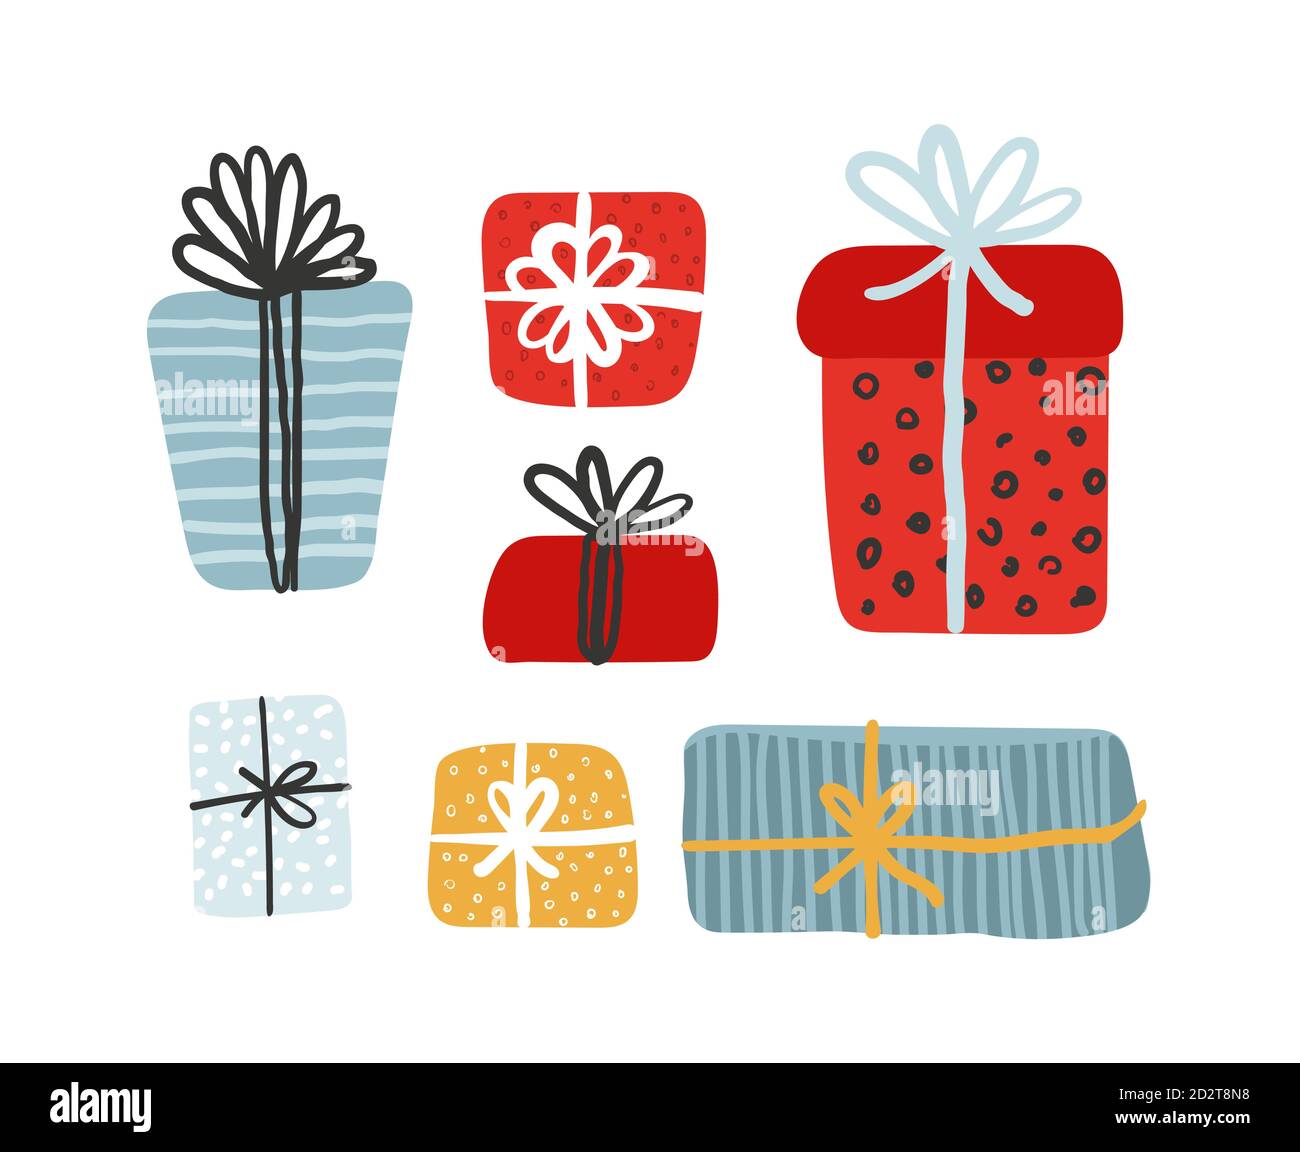 Gift boxes set, presents isolated on white background. Sale, holiday, shopping concept. Collection for Birthday, Christmas. Colorful wrapped. Stock Vector Cartoon flat design Stock Vector